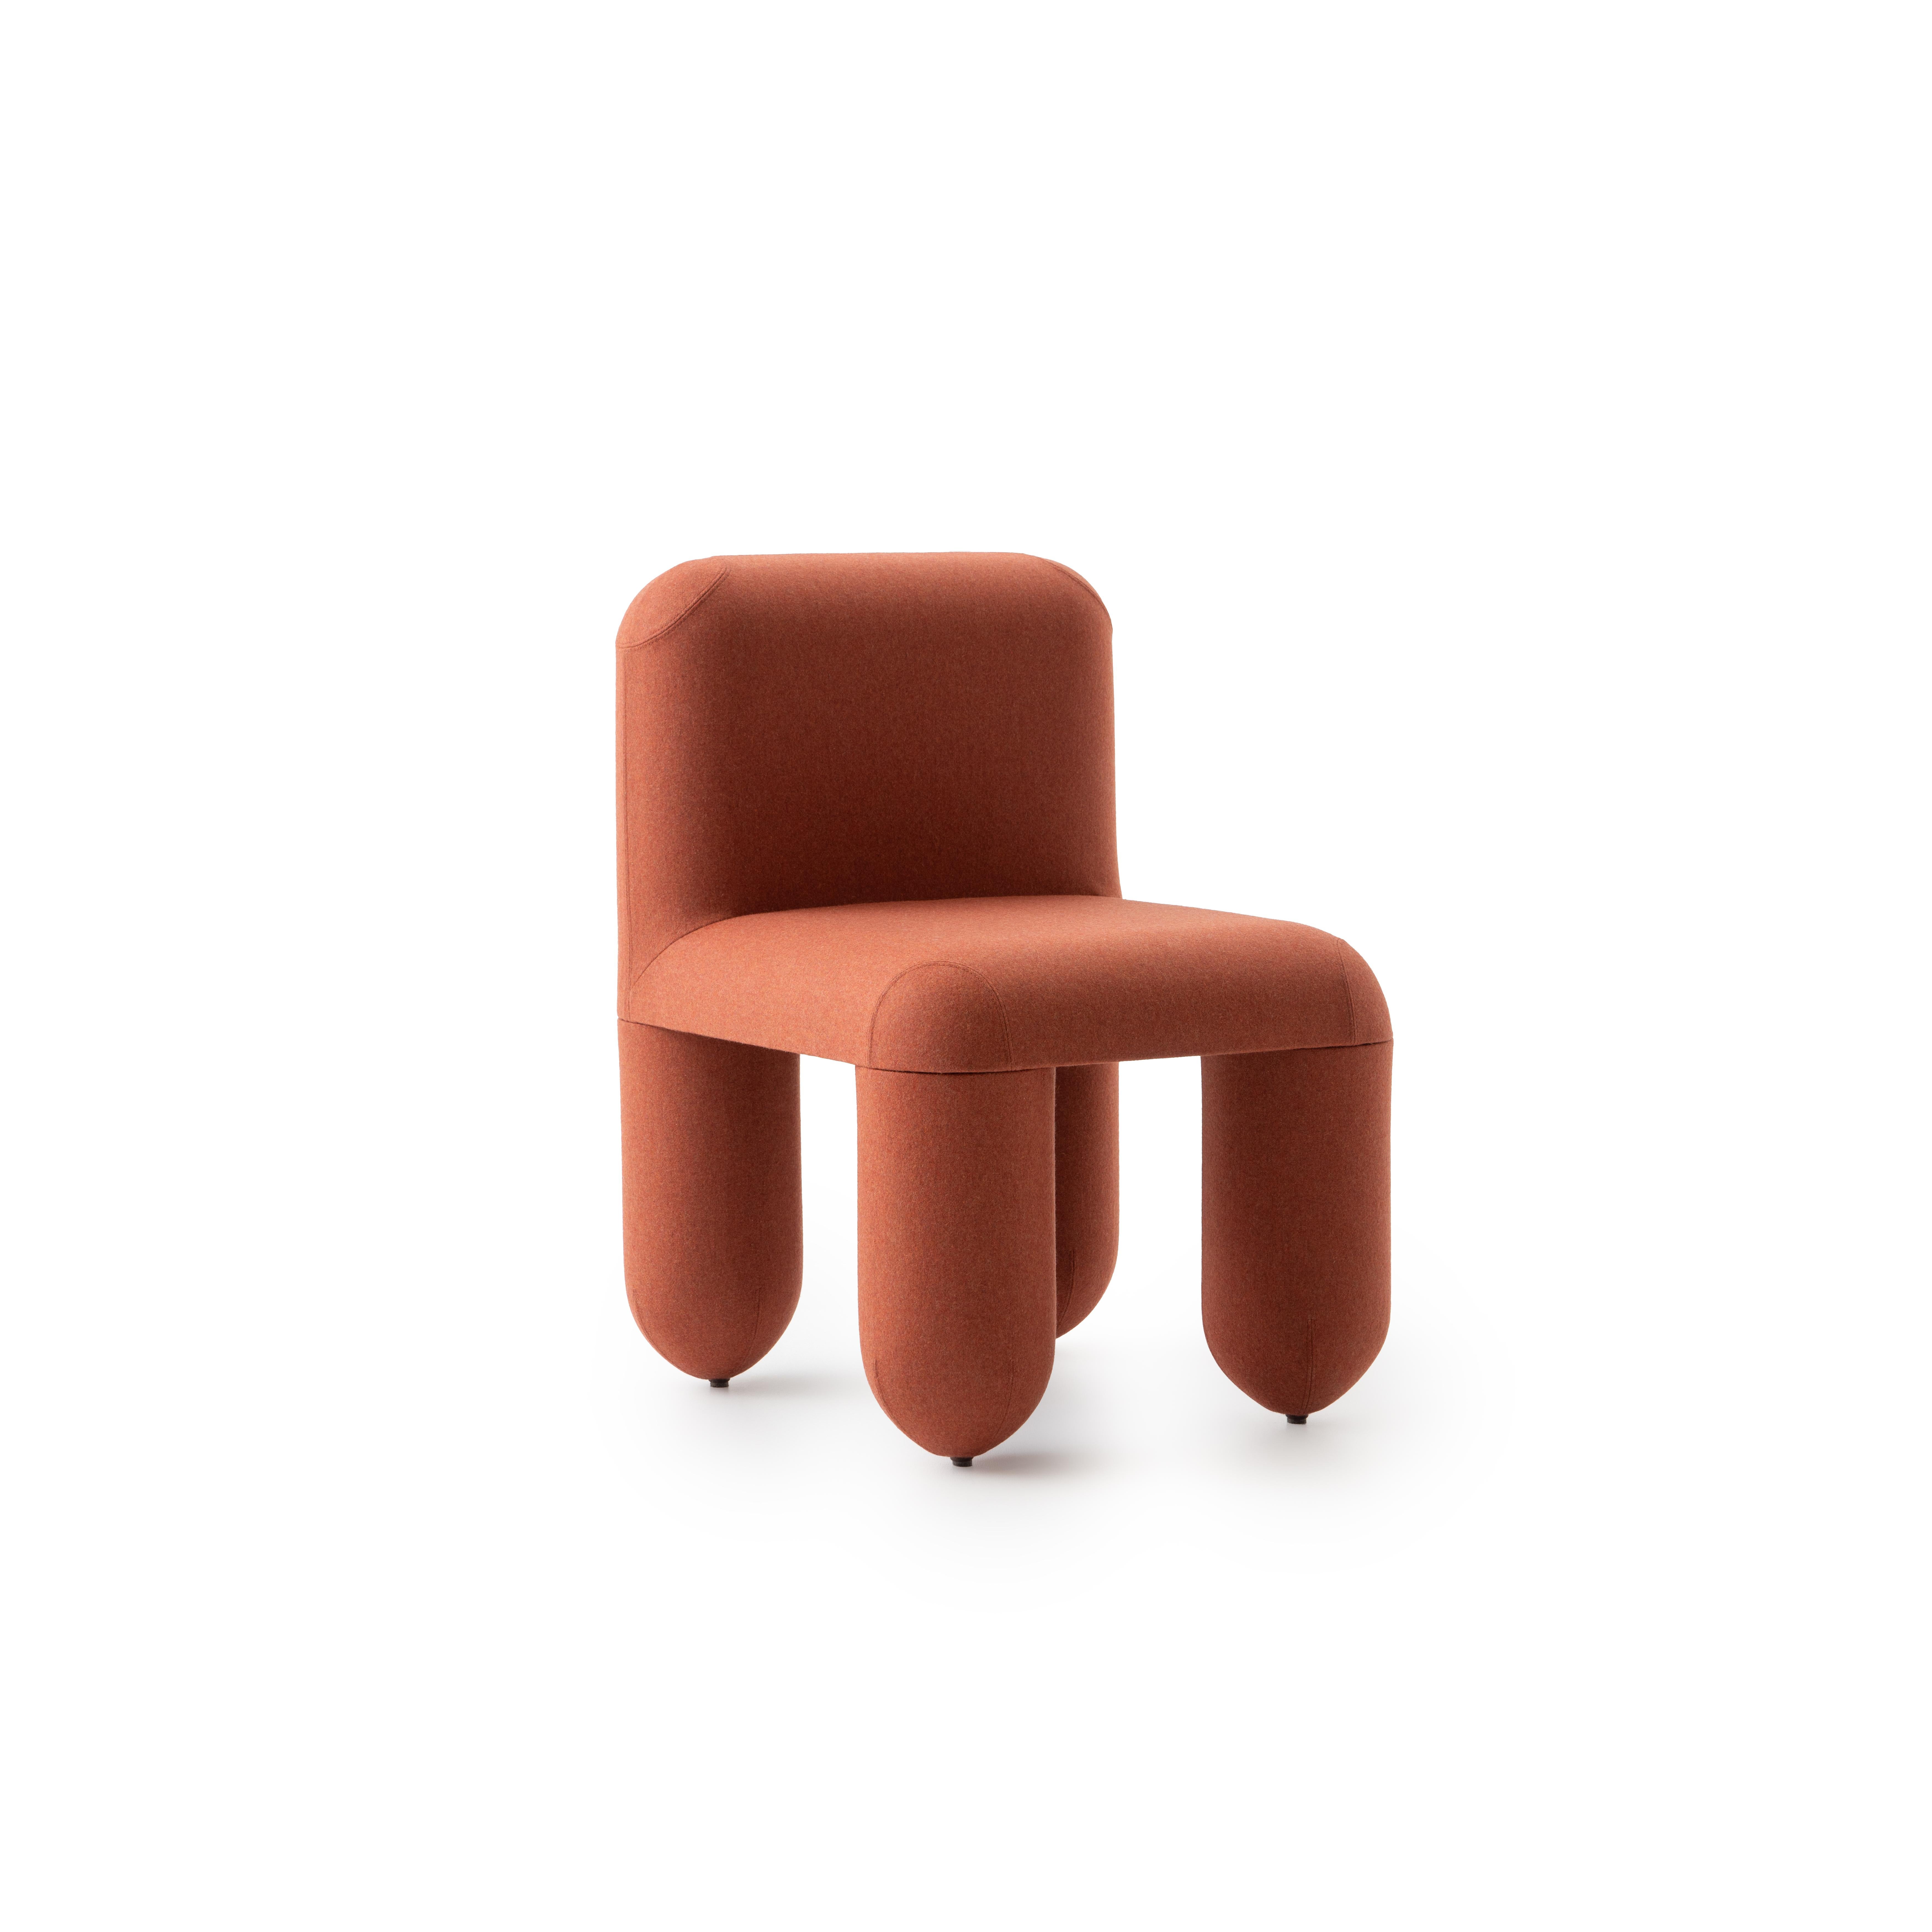 Ukrainian Contemporary Dining Chair 'Hello' by Denys Sokolov x Noom, Orange For Sale